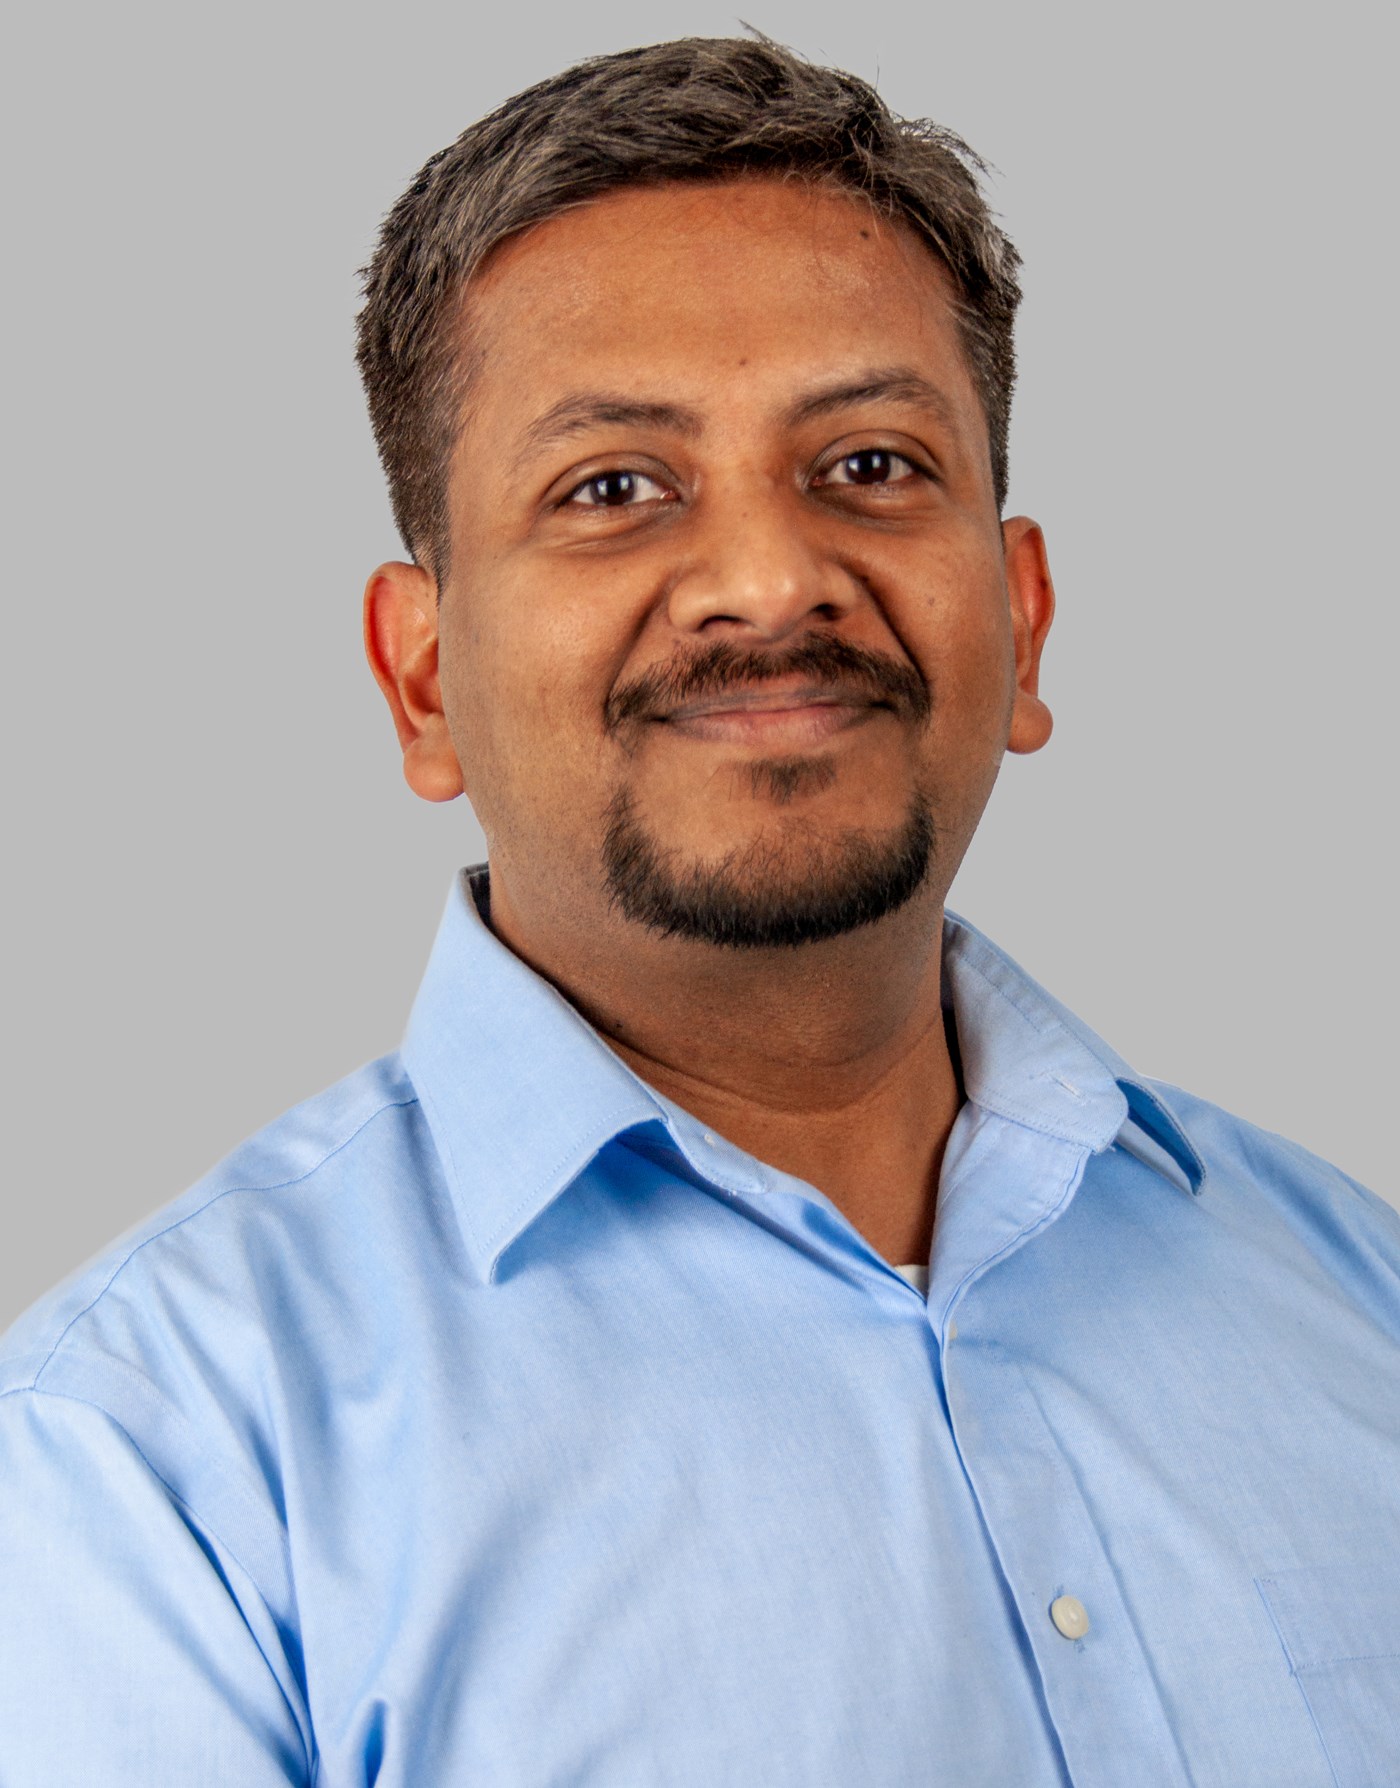 Aashish Jain is an Systems Analyst in  Information Technology at UMass Lowell.